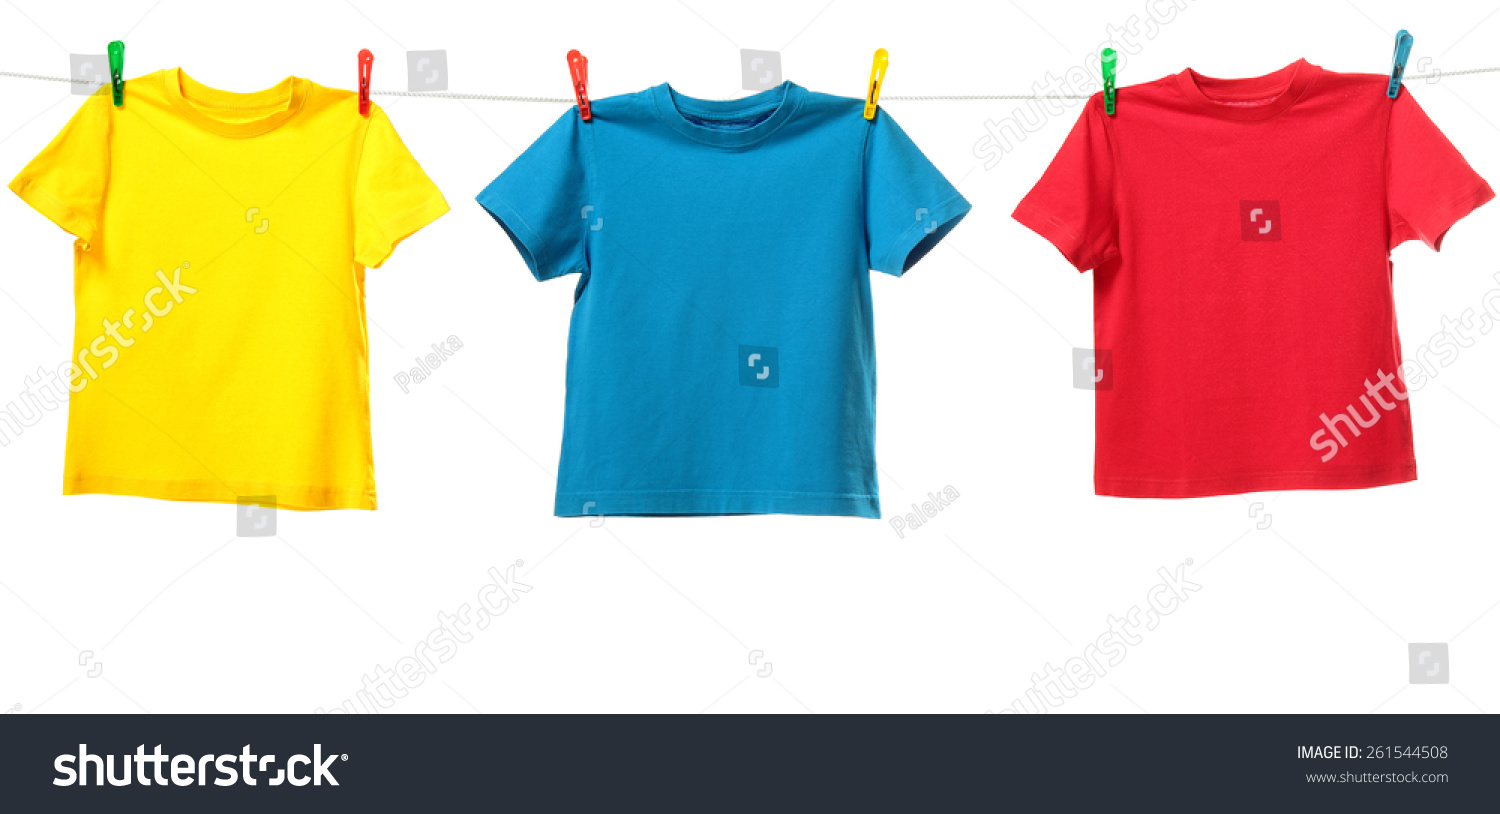 Three Colorful Shirts Hanging On The Clothesline Image Isolated On